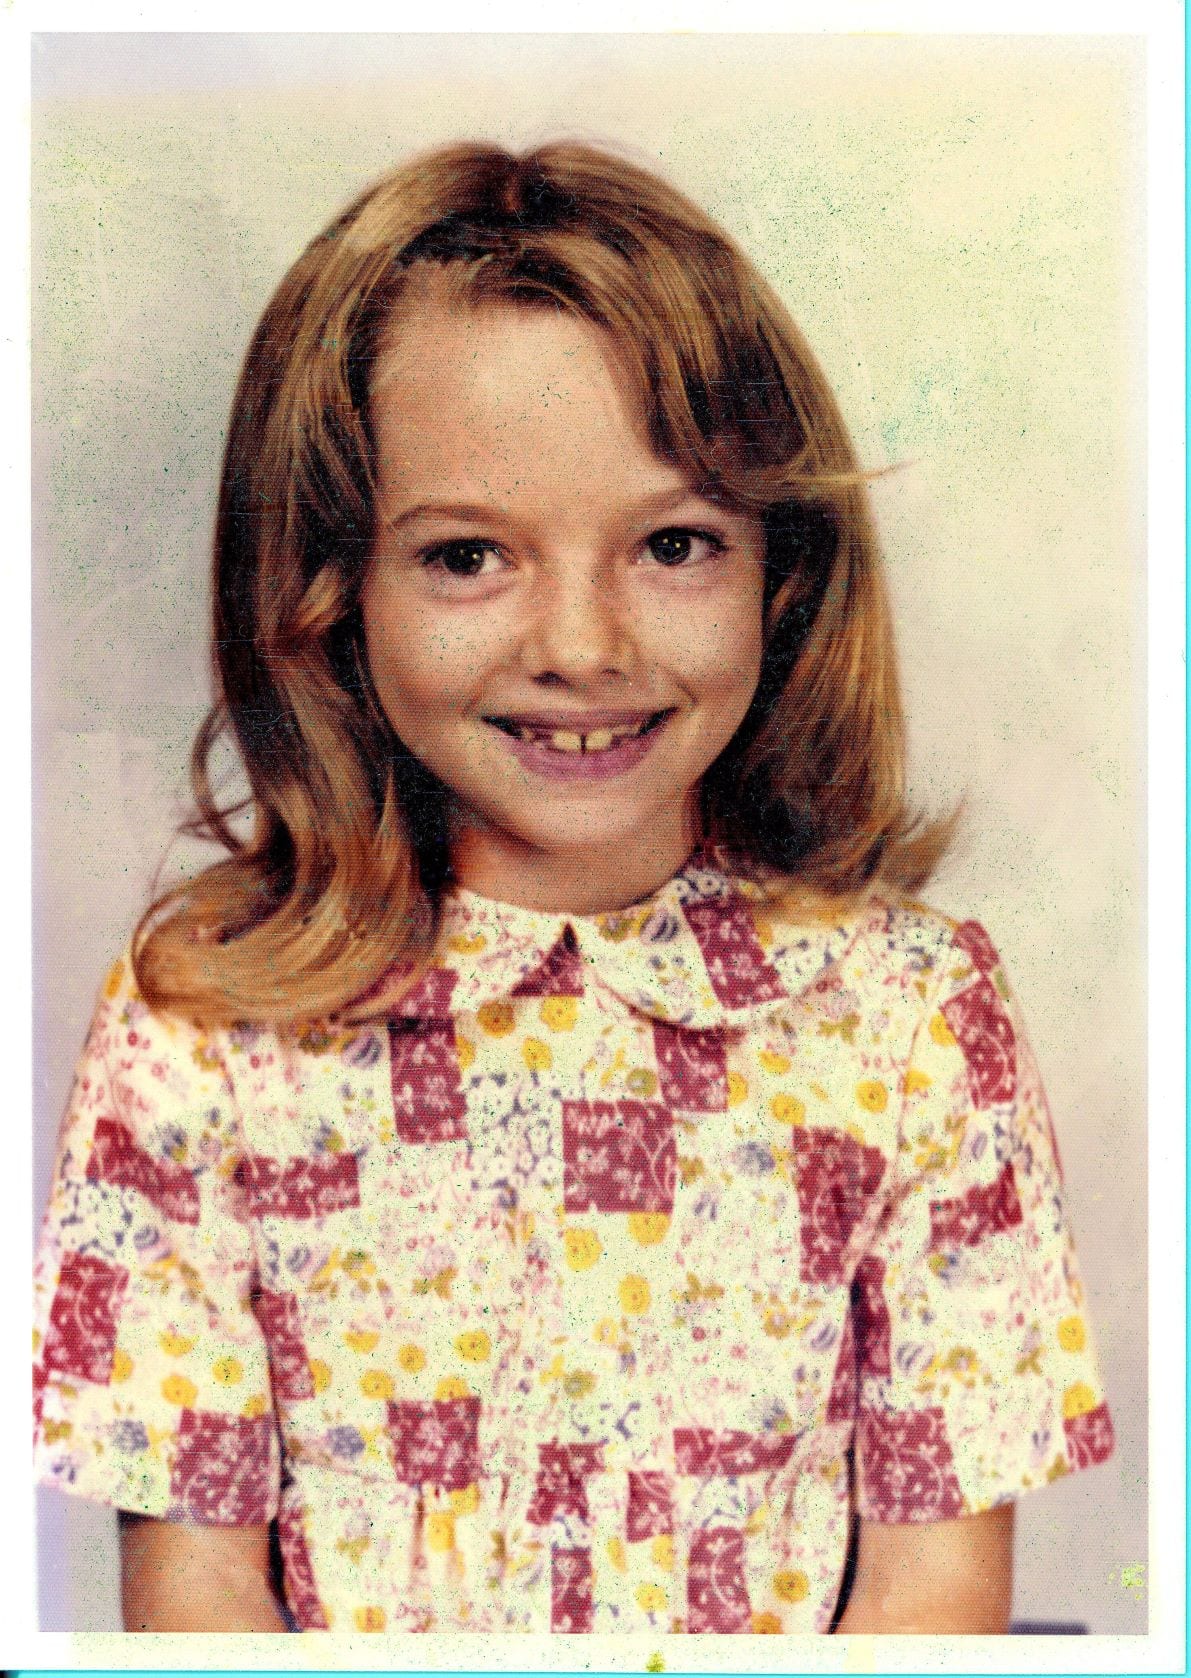 Lisa Montgomery as a young girl (age unknown).